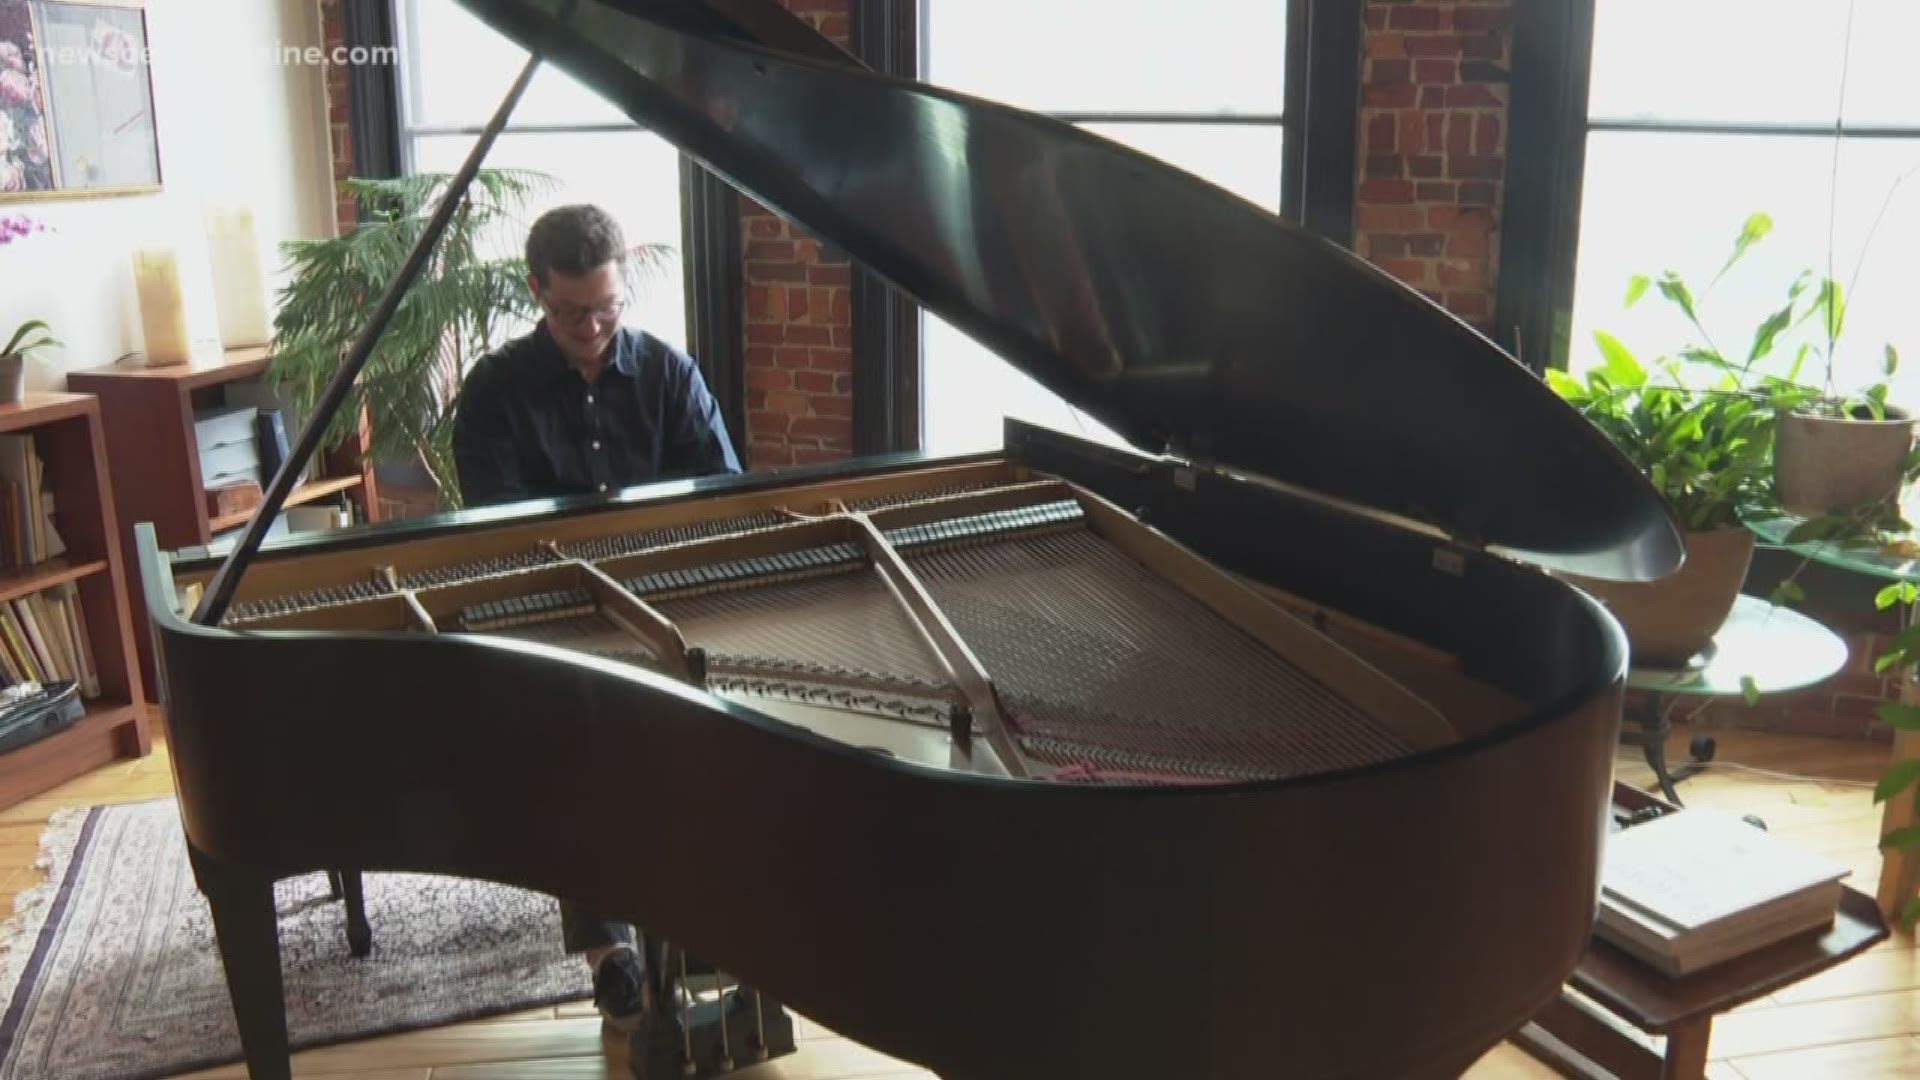 Henry Kramer explains how the 'Titanic' was one of the first pop songs that inspired him to keep working at the piano.